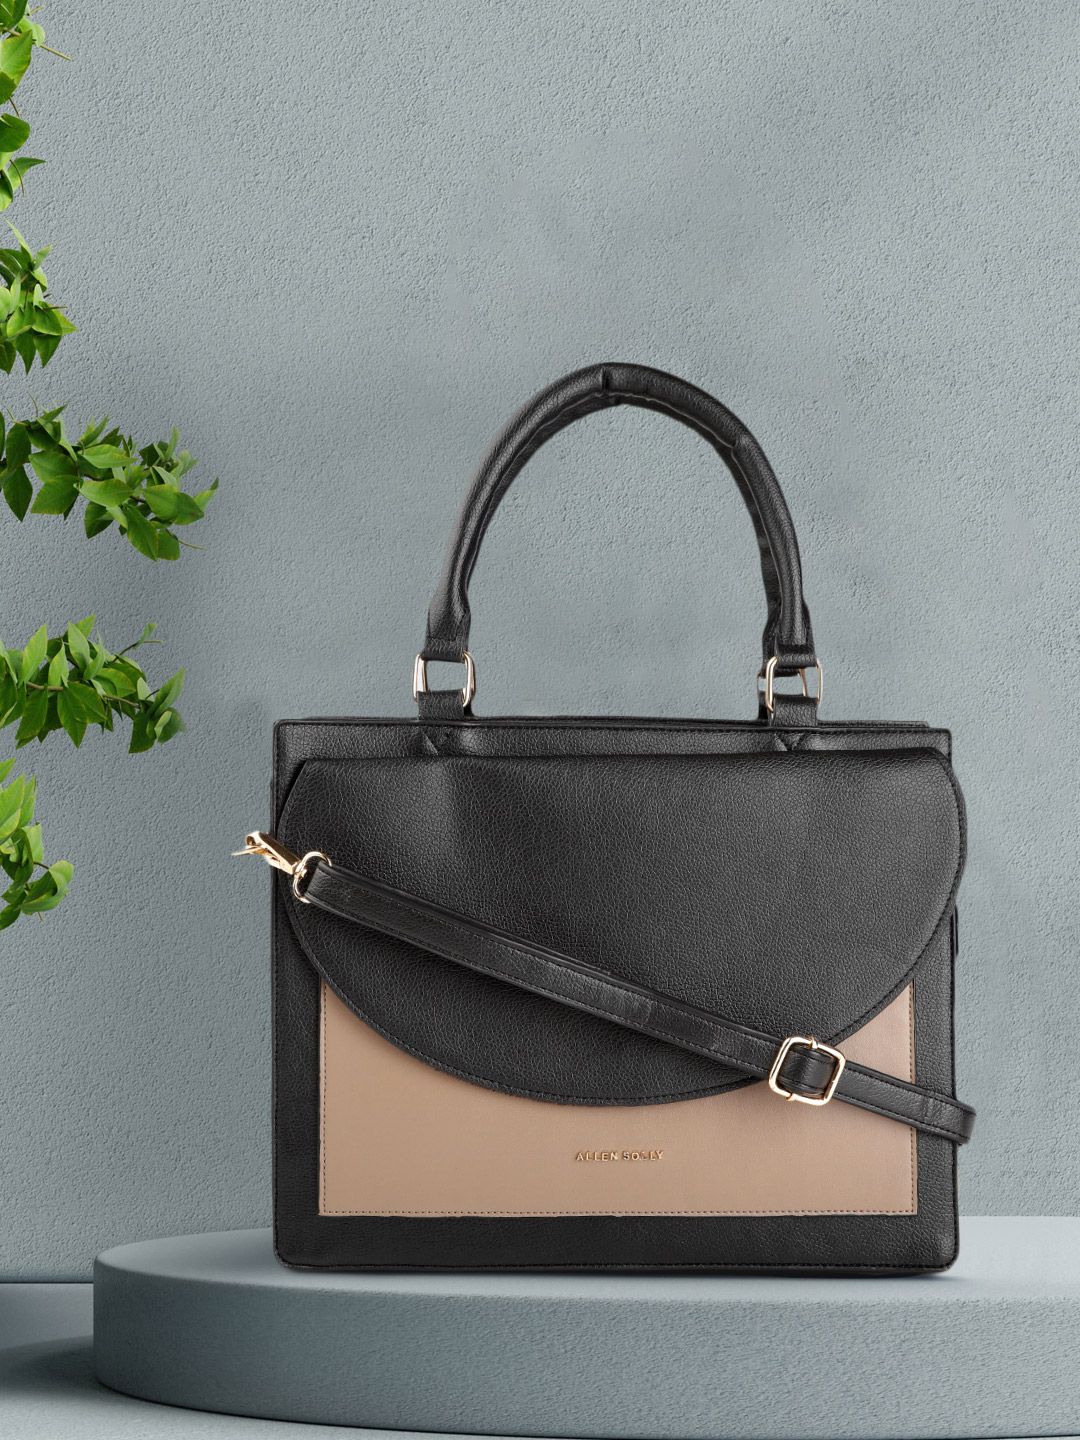 Allen Solly Black & Nude-Coloured Colourblocked Structured Handheld Bag Price in India